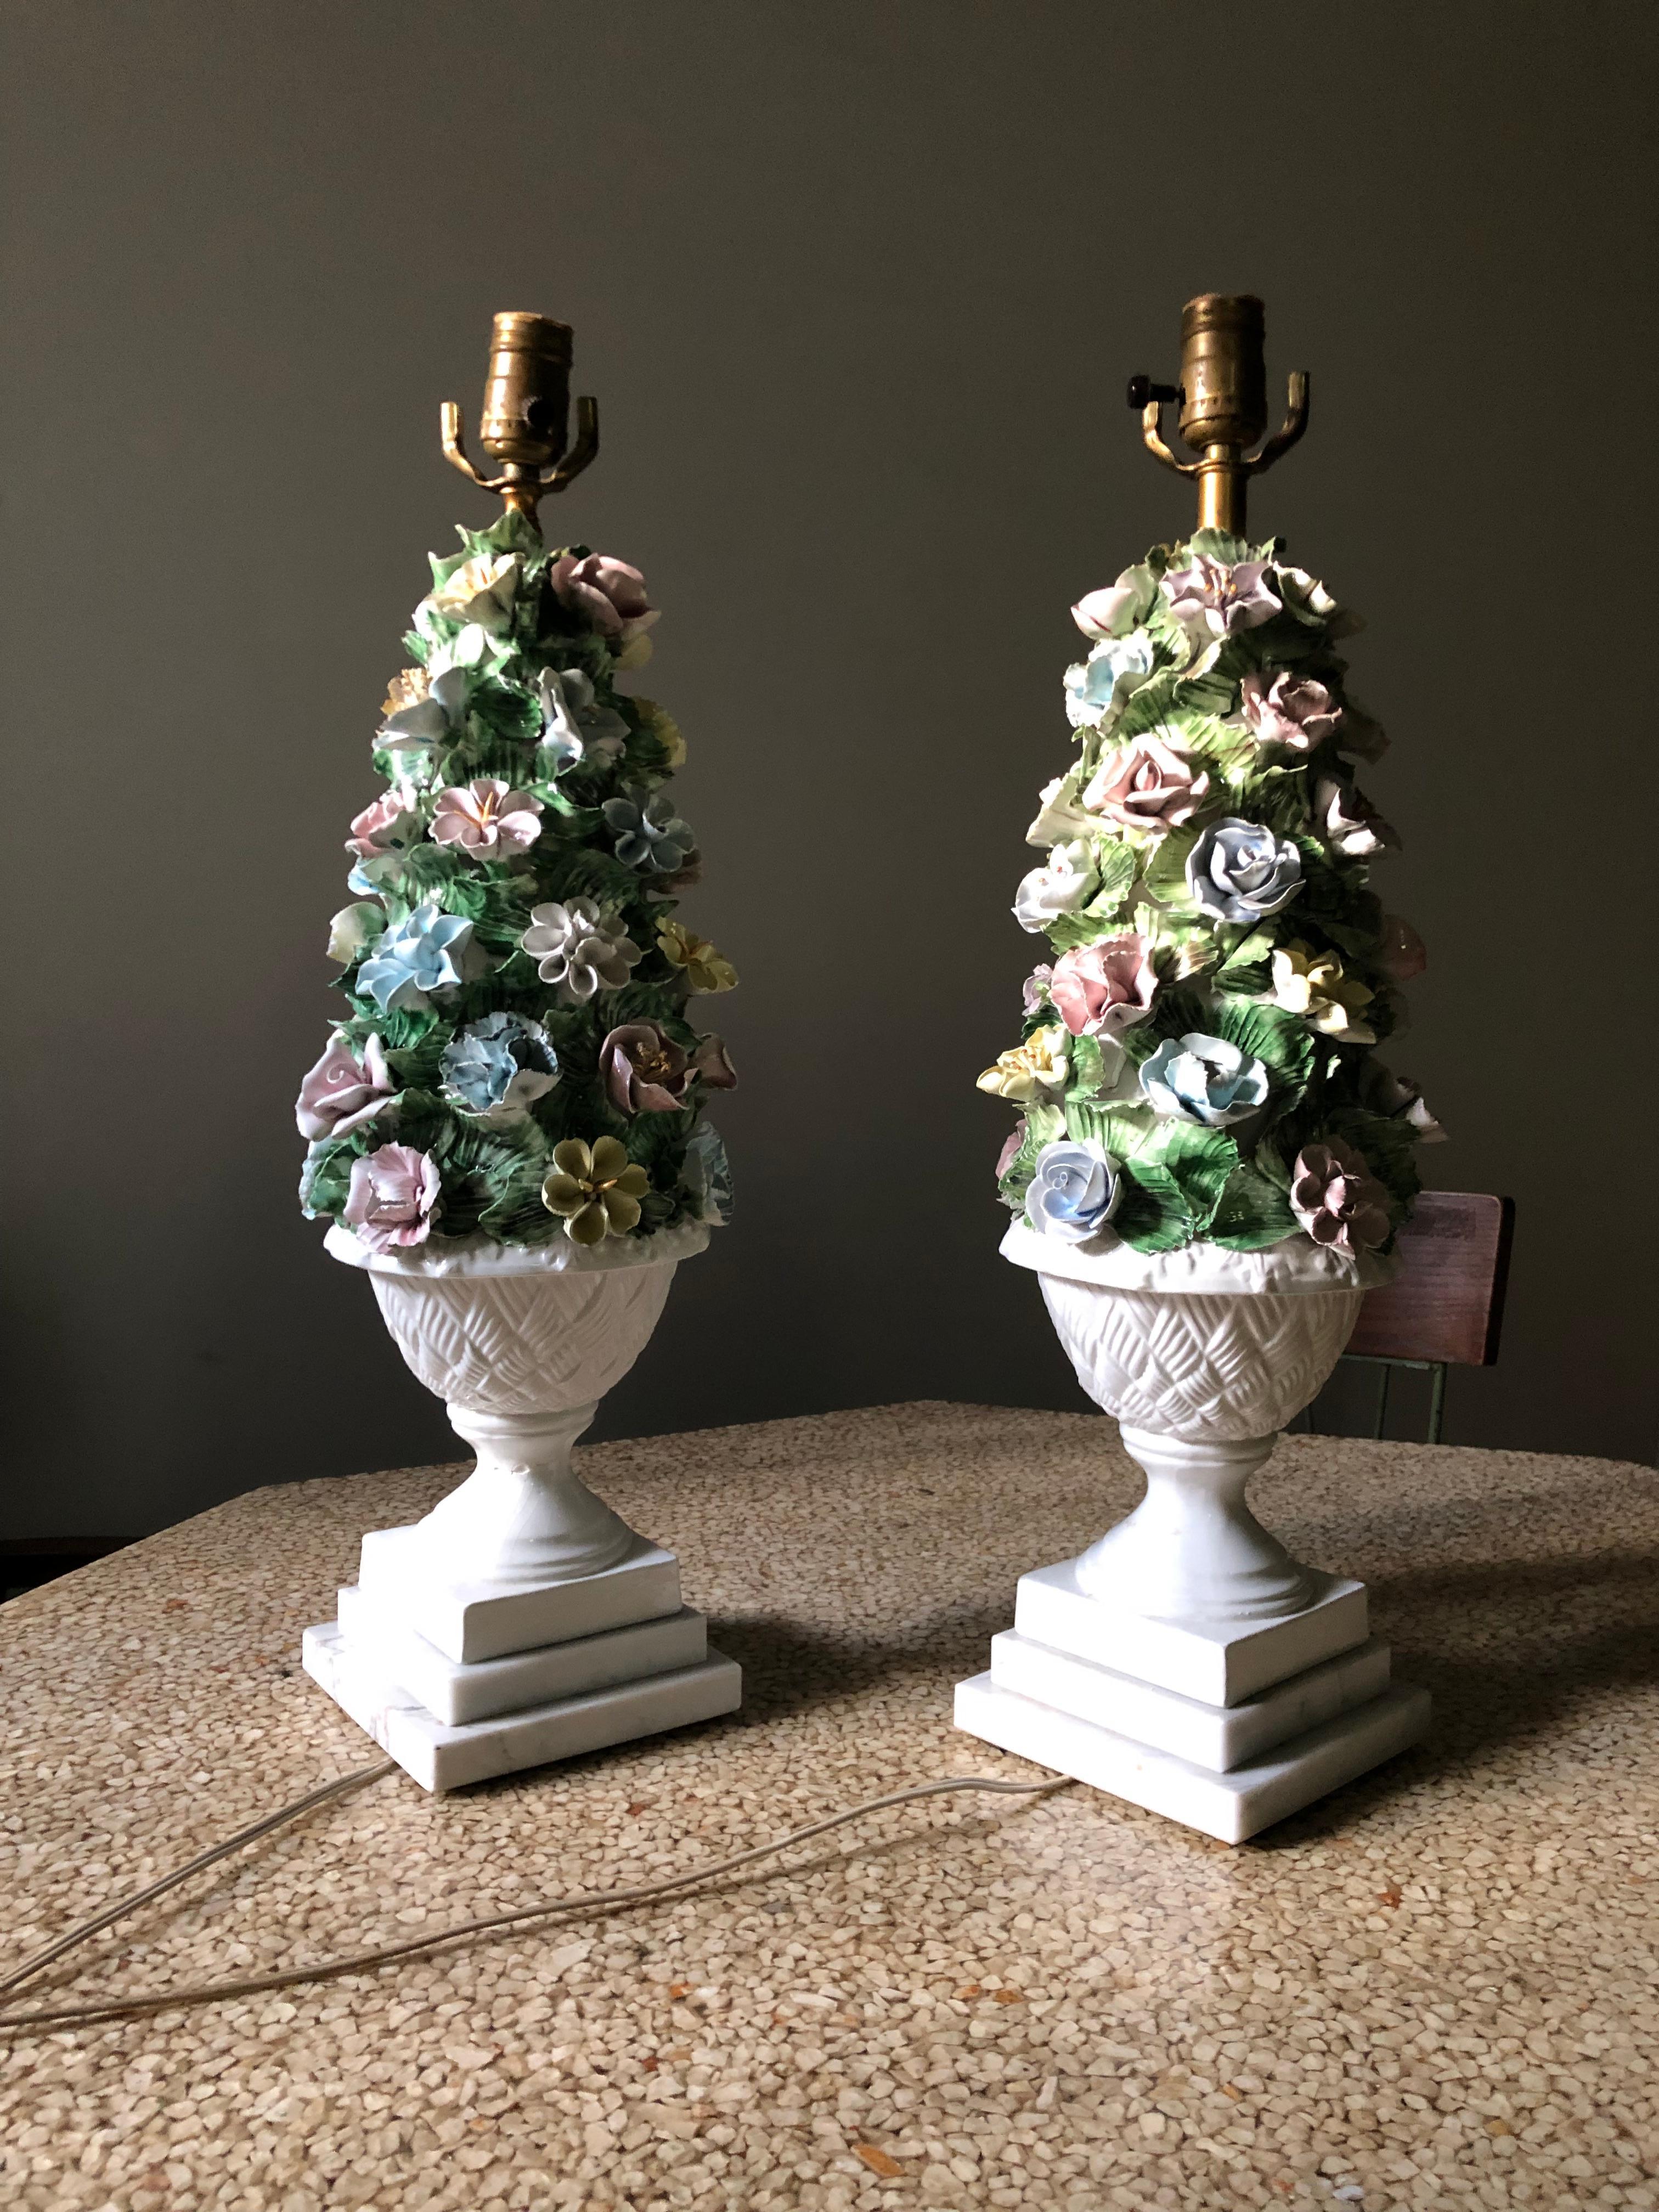 20th Century Midcentury Italian Modern Capodimonte Porcelain Topiary Floral Table Lamps For Sale